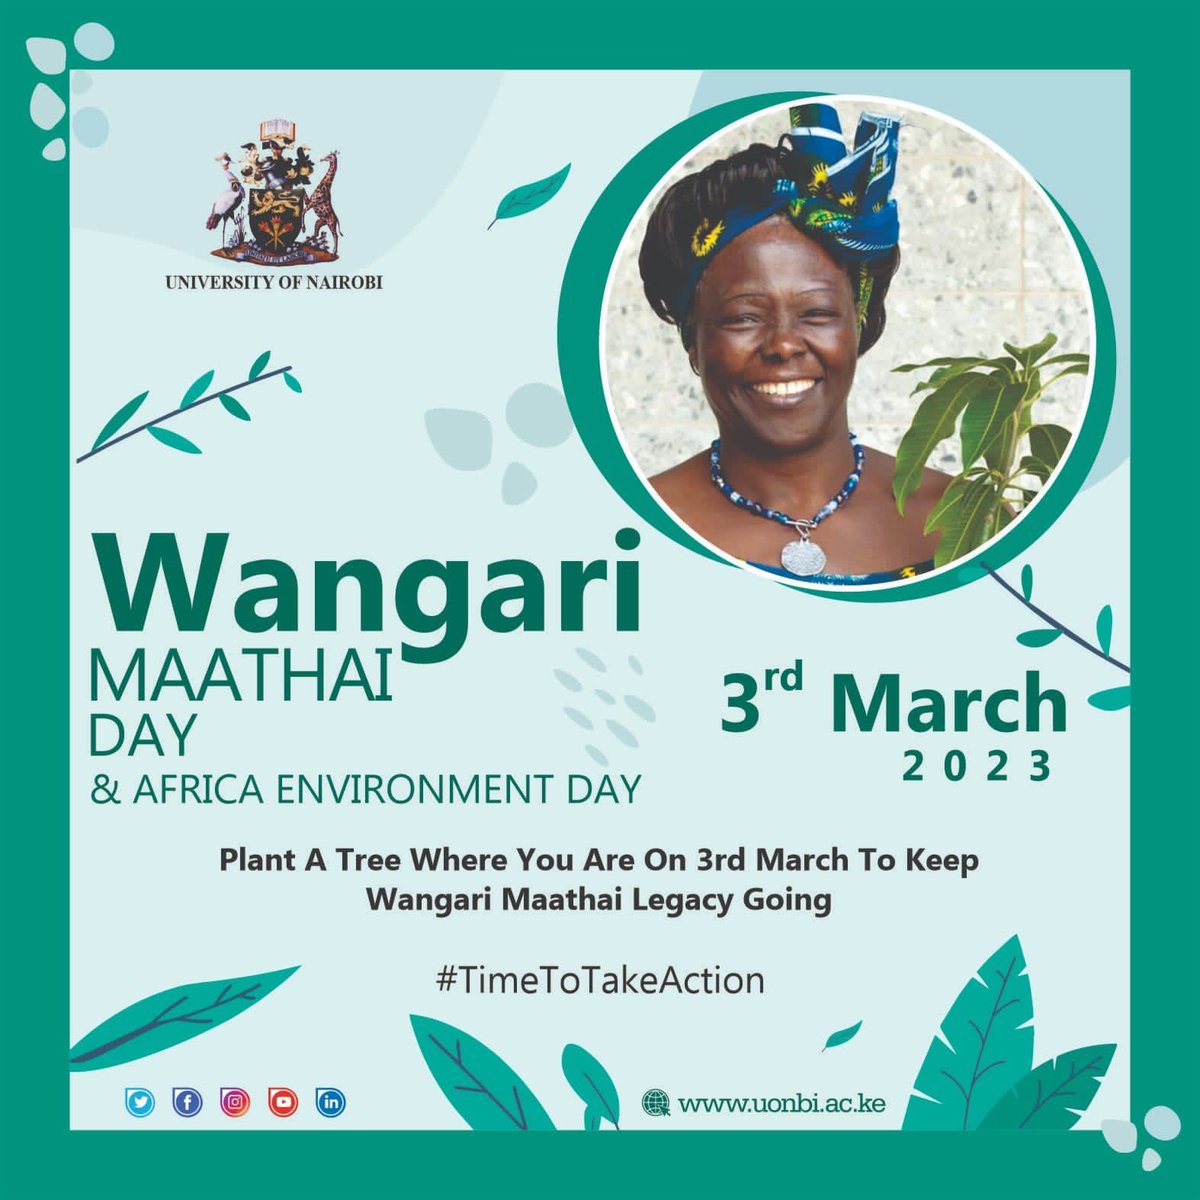 Today we celebrate the Iconic Champion towards climate preservation, a noble prize awarded professor, Prof. Wangari Maathai. #TimeToTakeAction, Plant a Tree Where You Are on 3rd March to Keep Wangari Maathai Legacy Going. #WeAreUoN @uonbi @UoNWMI